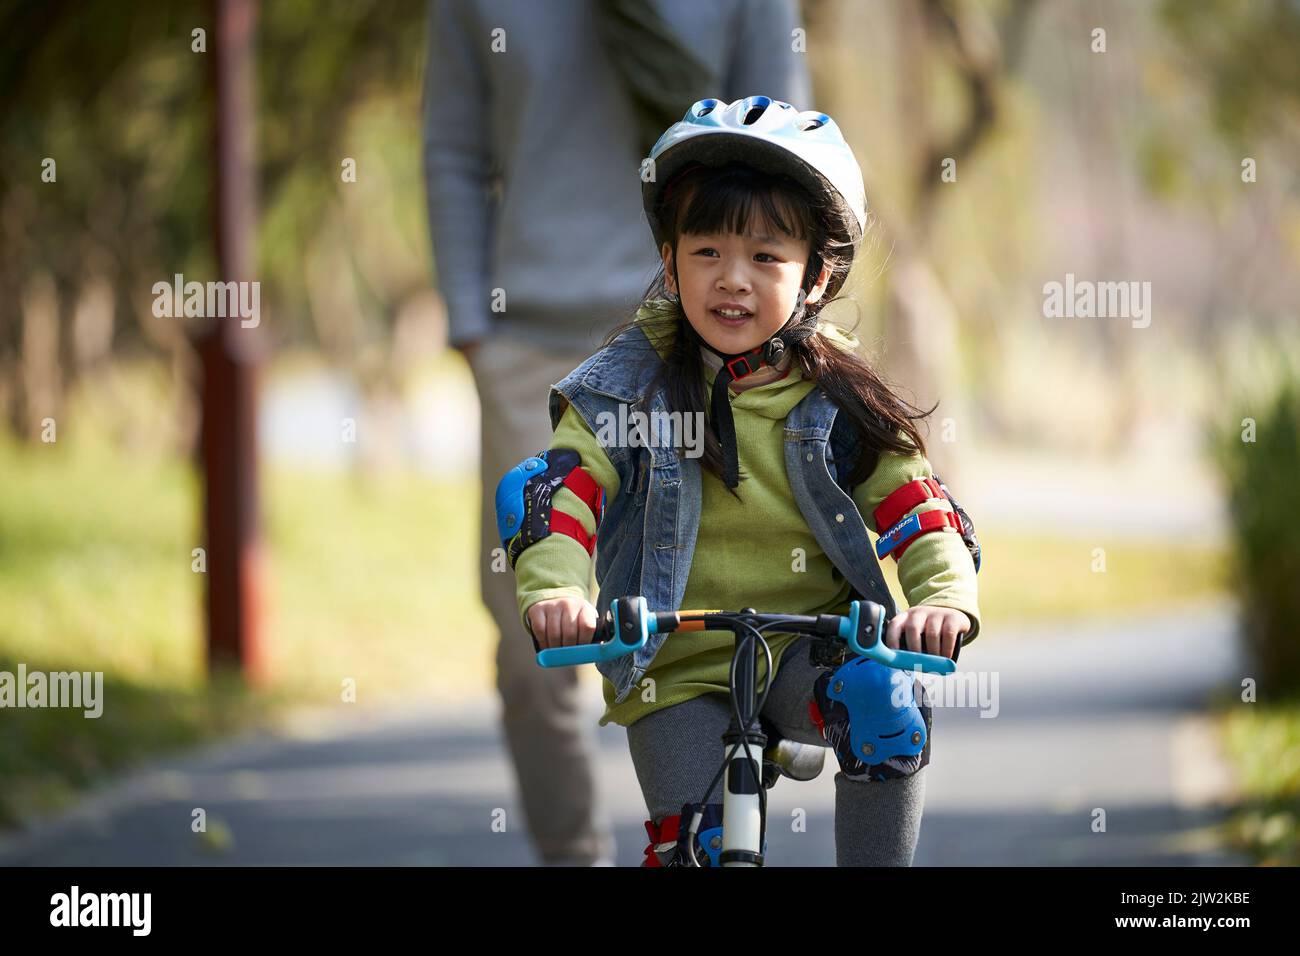 preschool little asian girl riding a kid bike in park with father walking behind Stock Photo